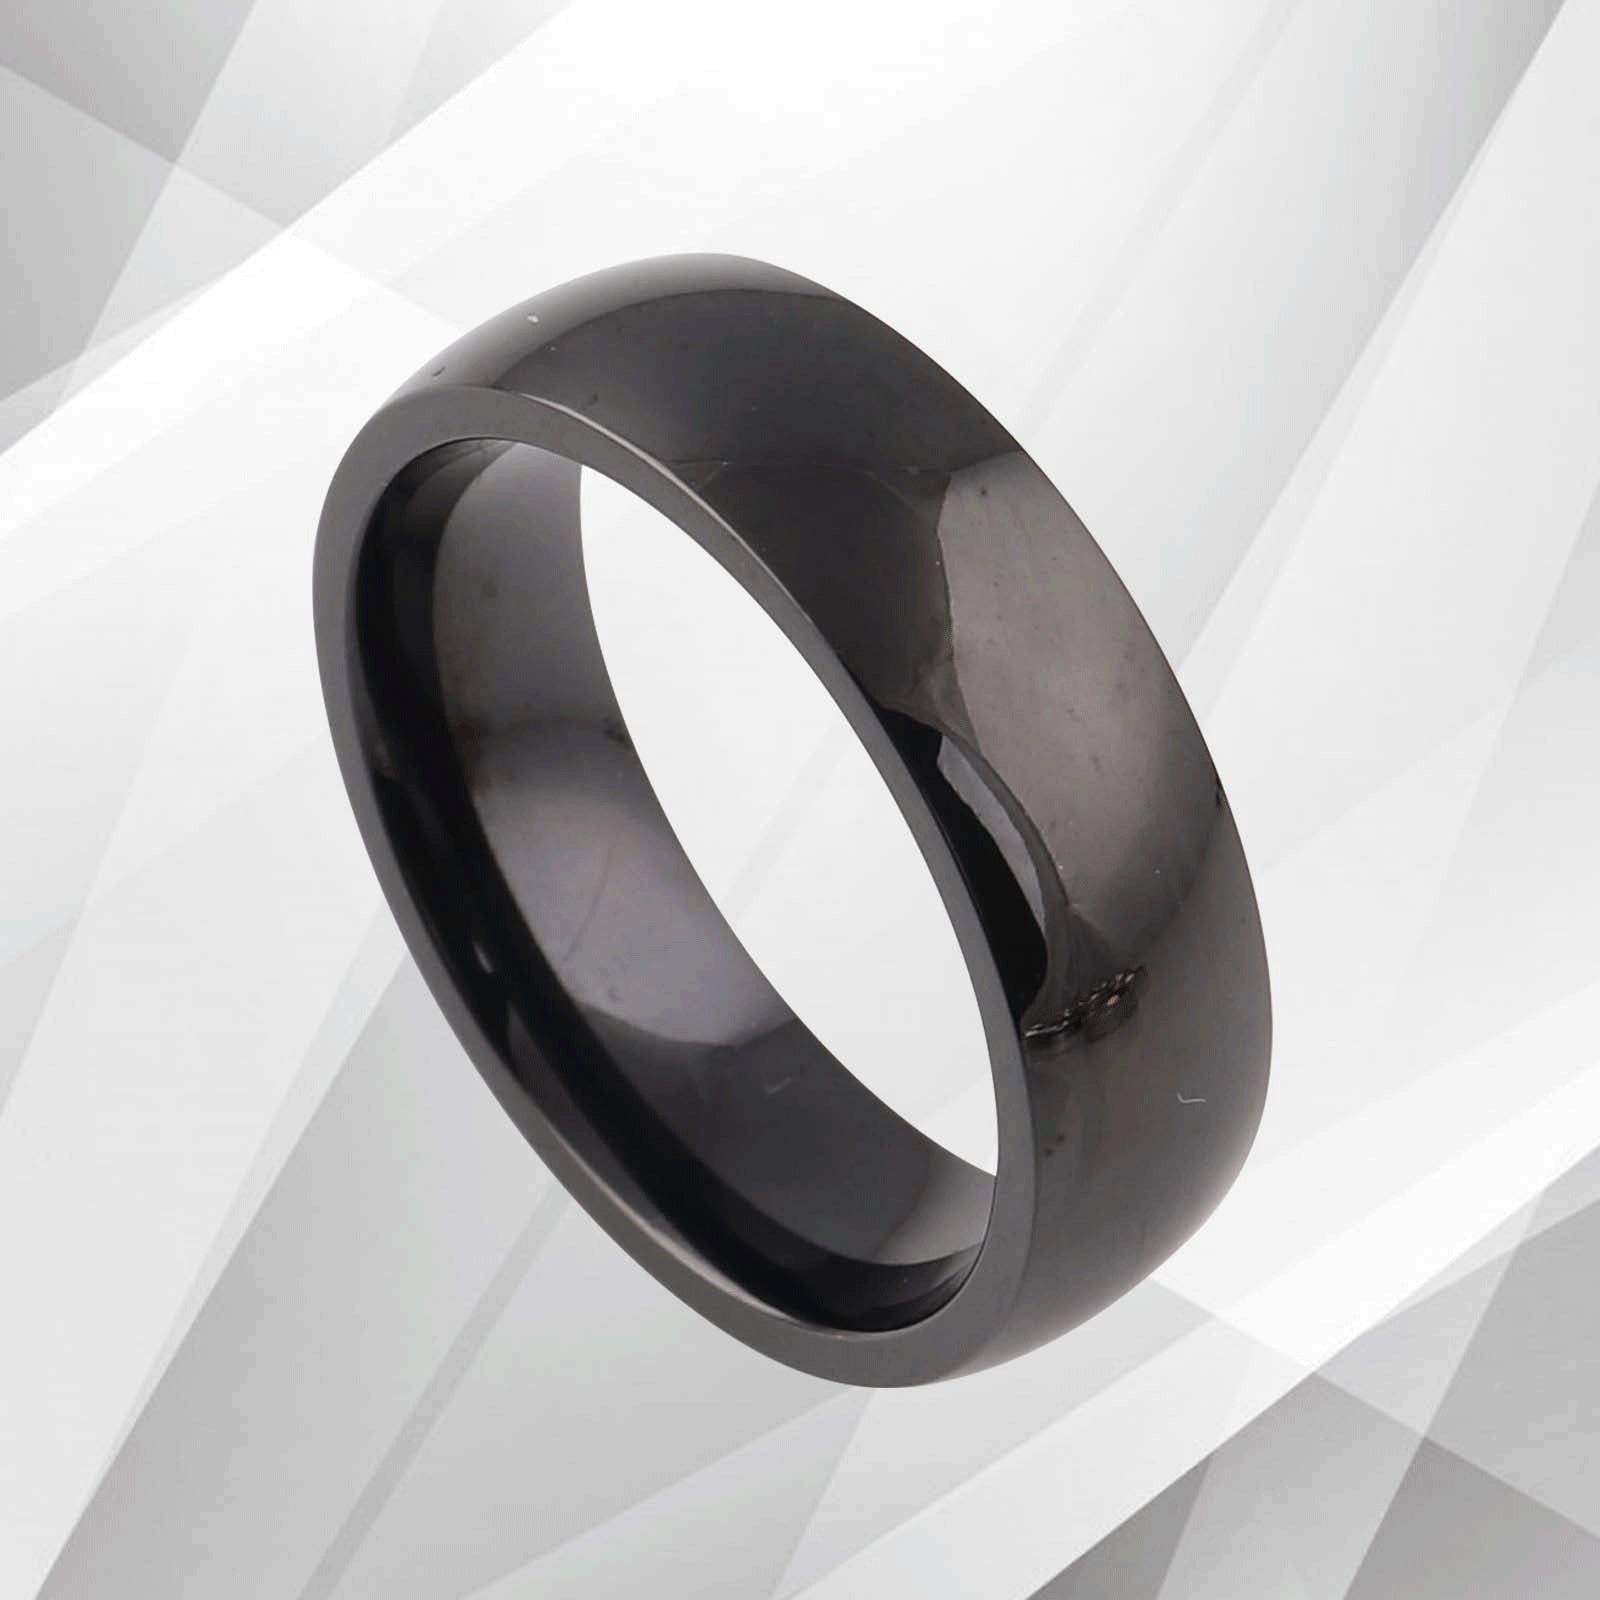 Gorgeous 6mm Black Tungsten Carbide Wedding Band for Men - D-Shape Comfort Fit Ring for Groom, Anniversary, Engagement - Jewelry & Watches - Bijou Her -  -  - 